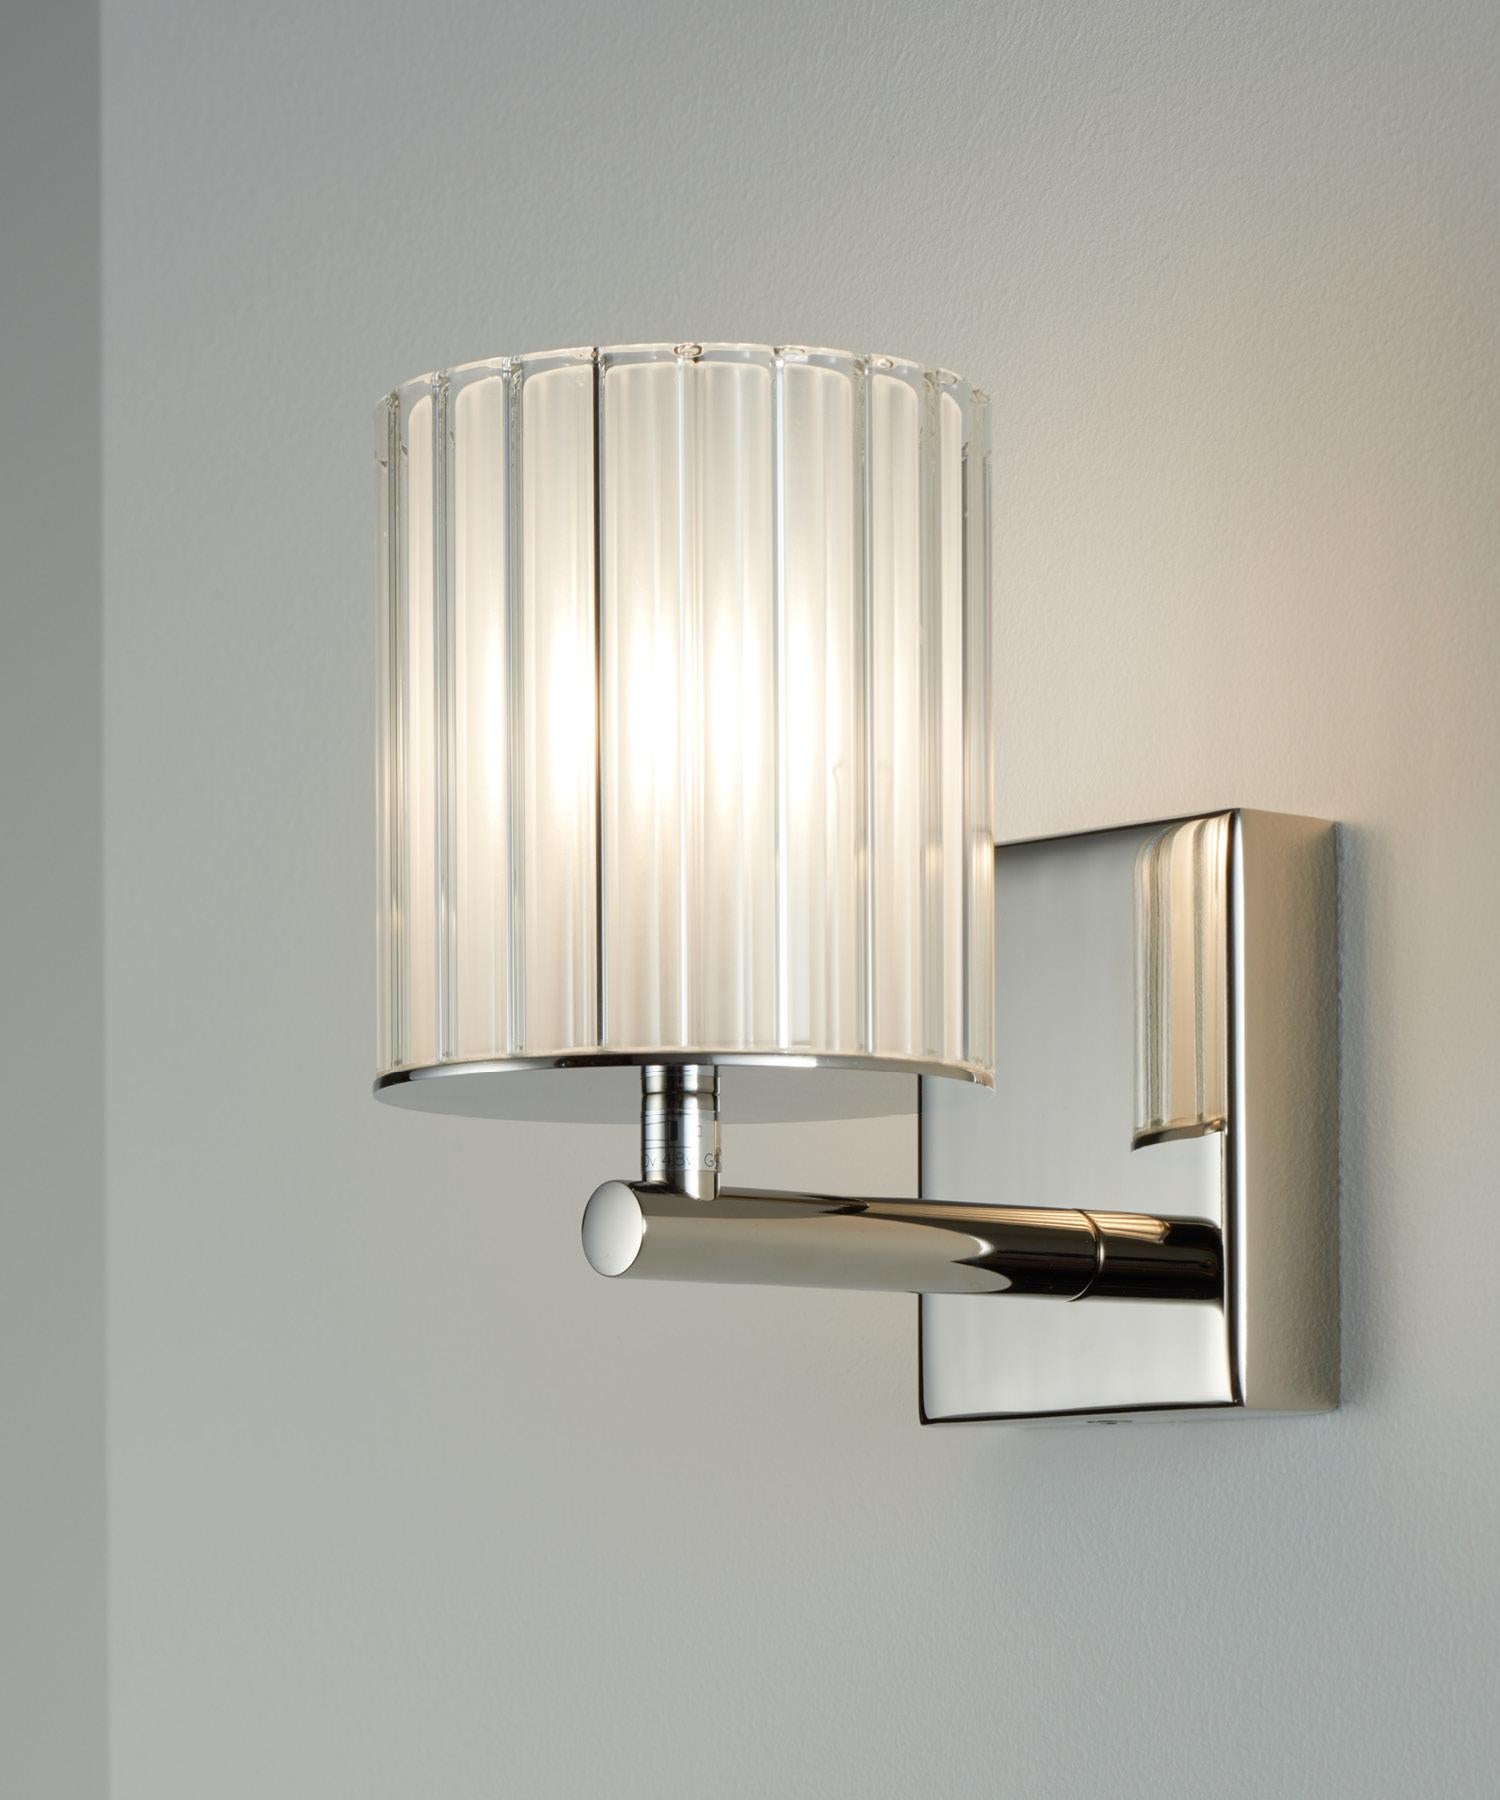 British Flute Wall Light in Brushed Nickel with Frosted Glass Diffuser, UL Listed